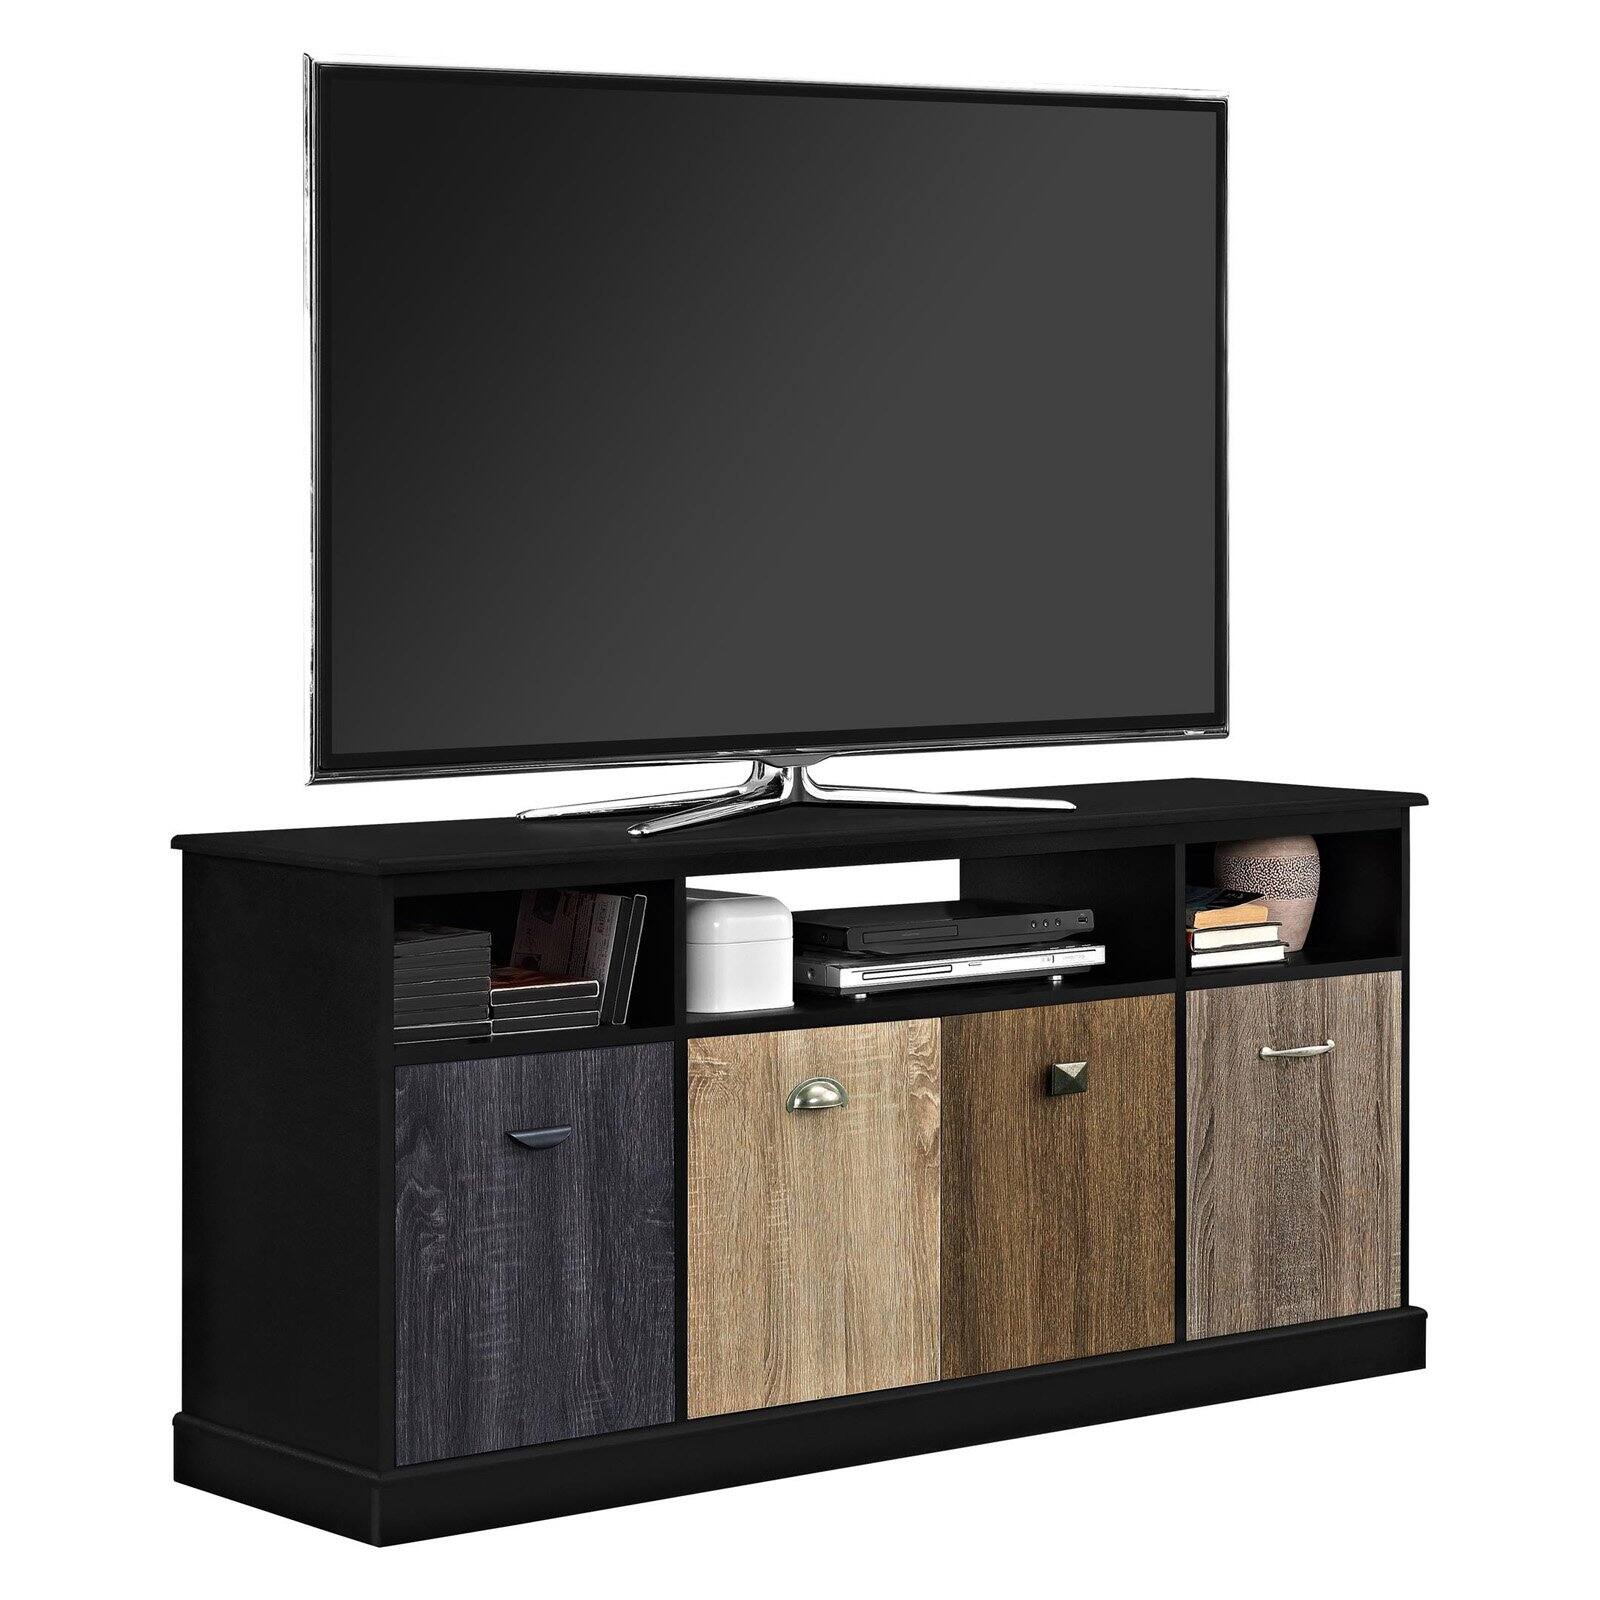 Ameriwood Home Mercer 60" TV Console with Multicolored Door Fronts, Multiple Colors - Black - image 5 of 5